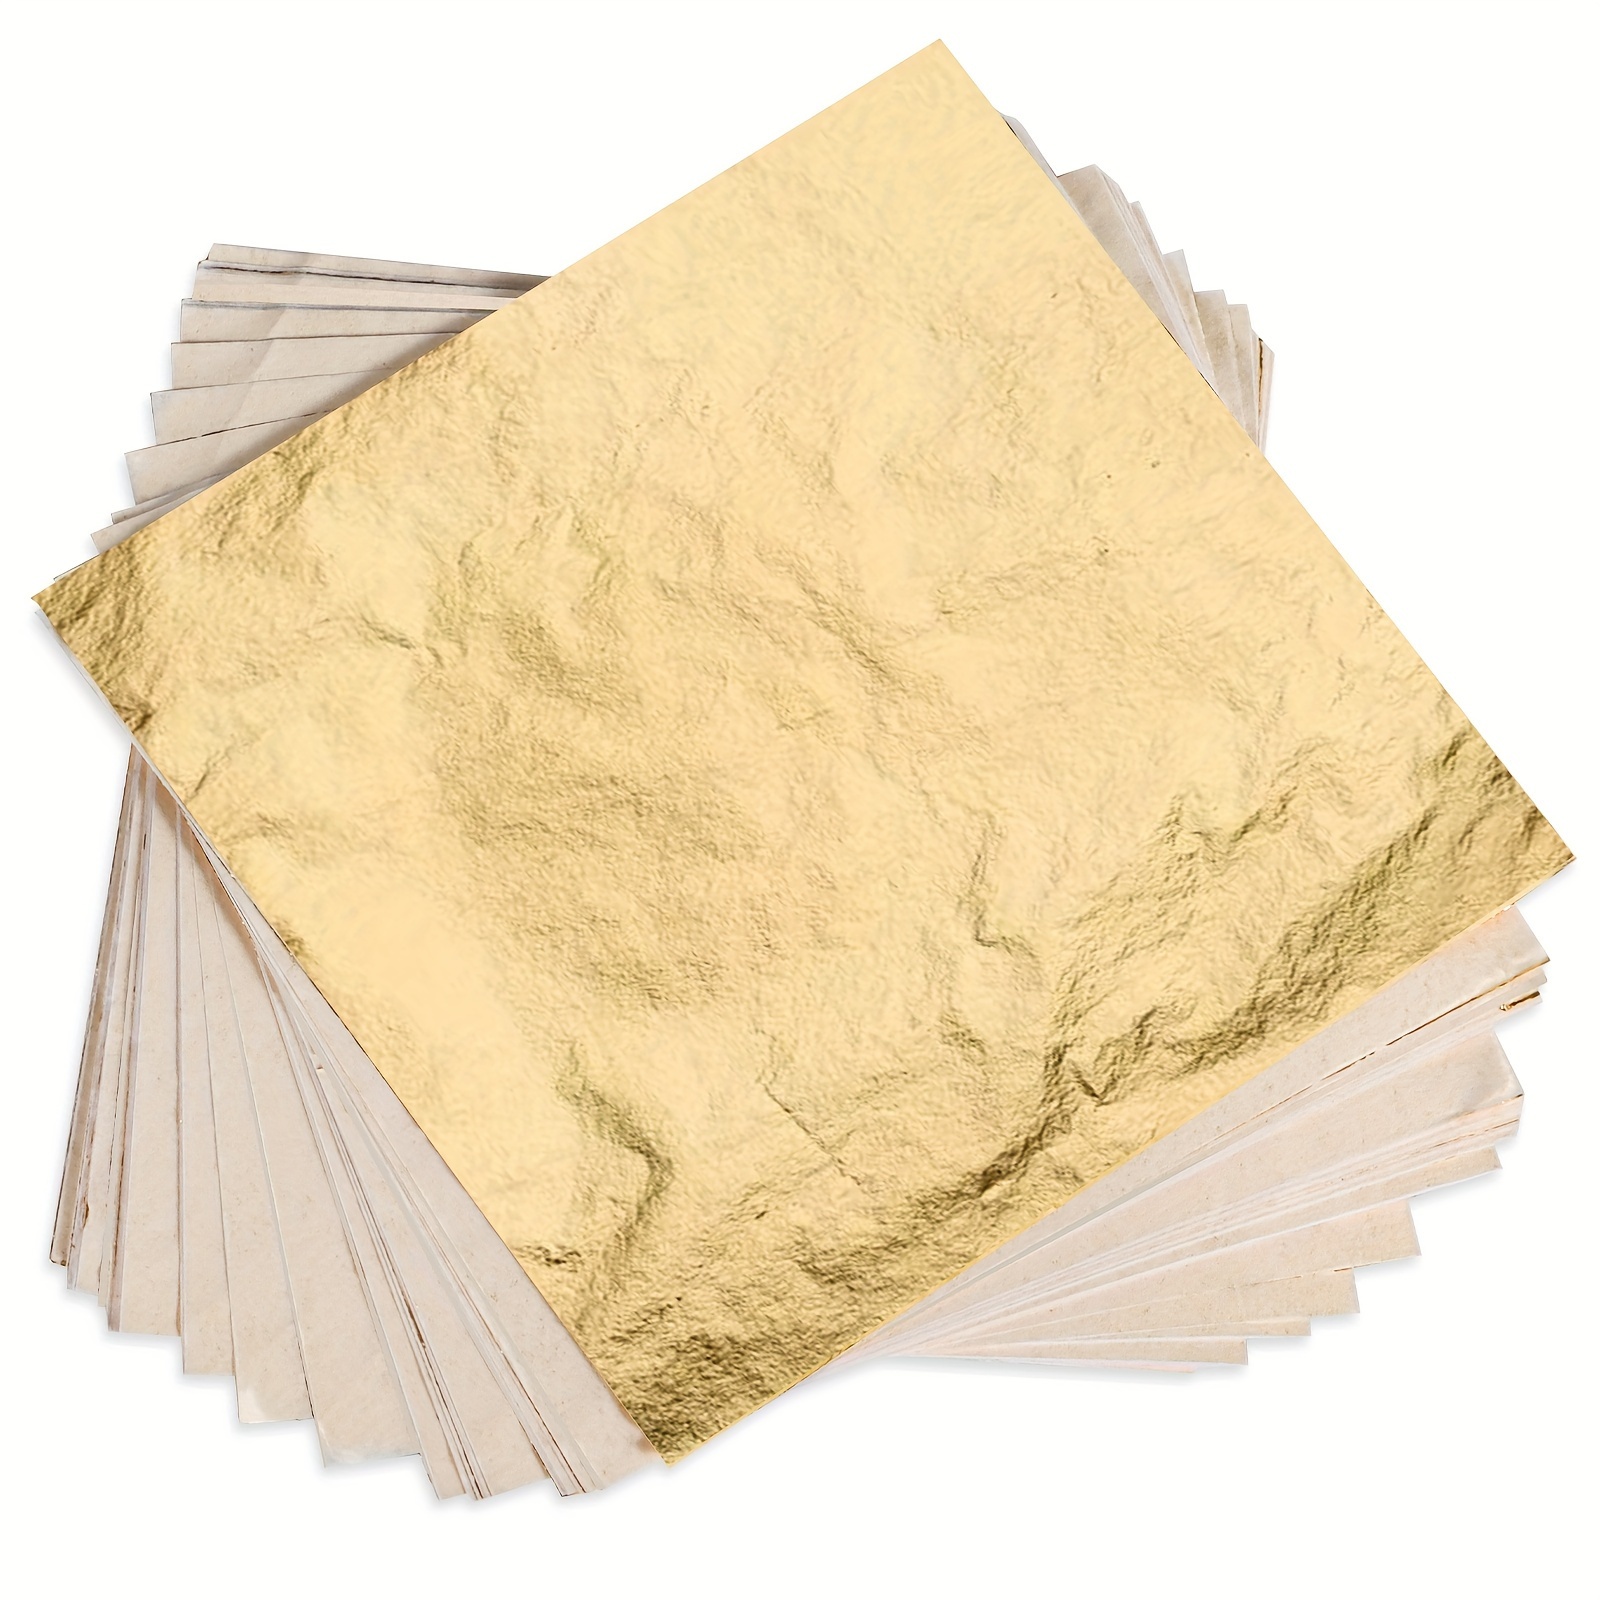 

100 Sheets Gold Leaf Paper For Gilding Crafts, Art, Diy Projects, Picture Frames, Home Wall Decor, Imitation Gold Foil Sheets 5.5" X 5.5" Copper Material Golden Color Easy To Break.